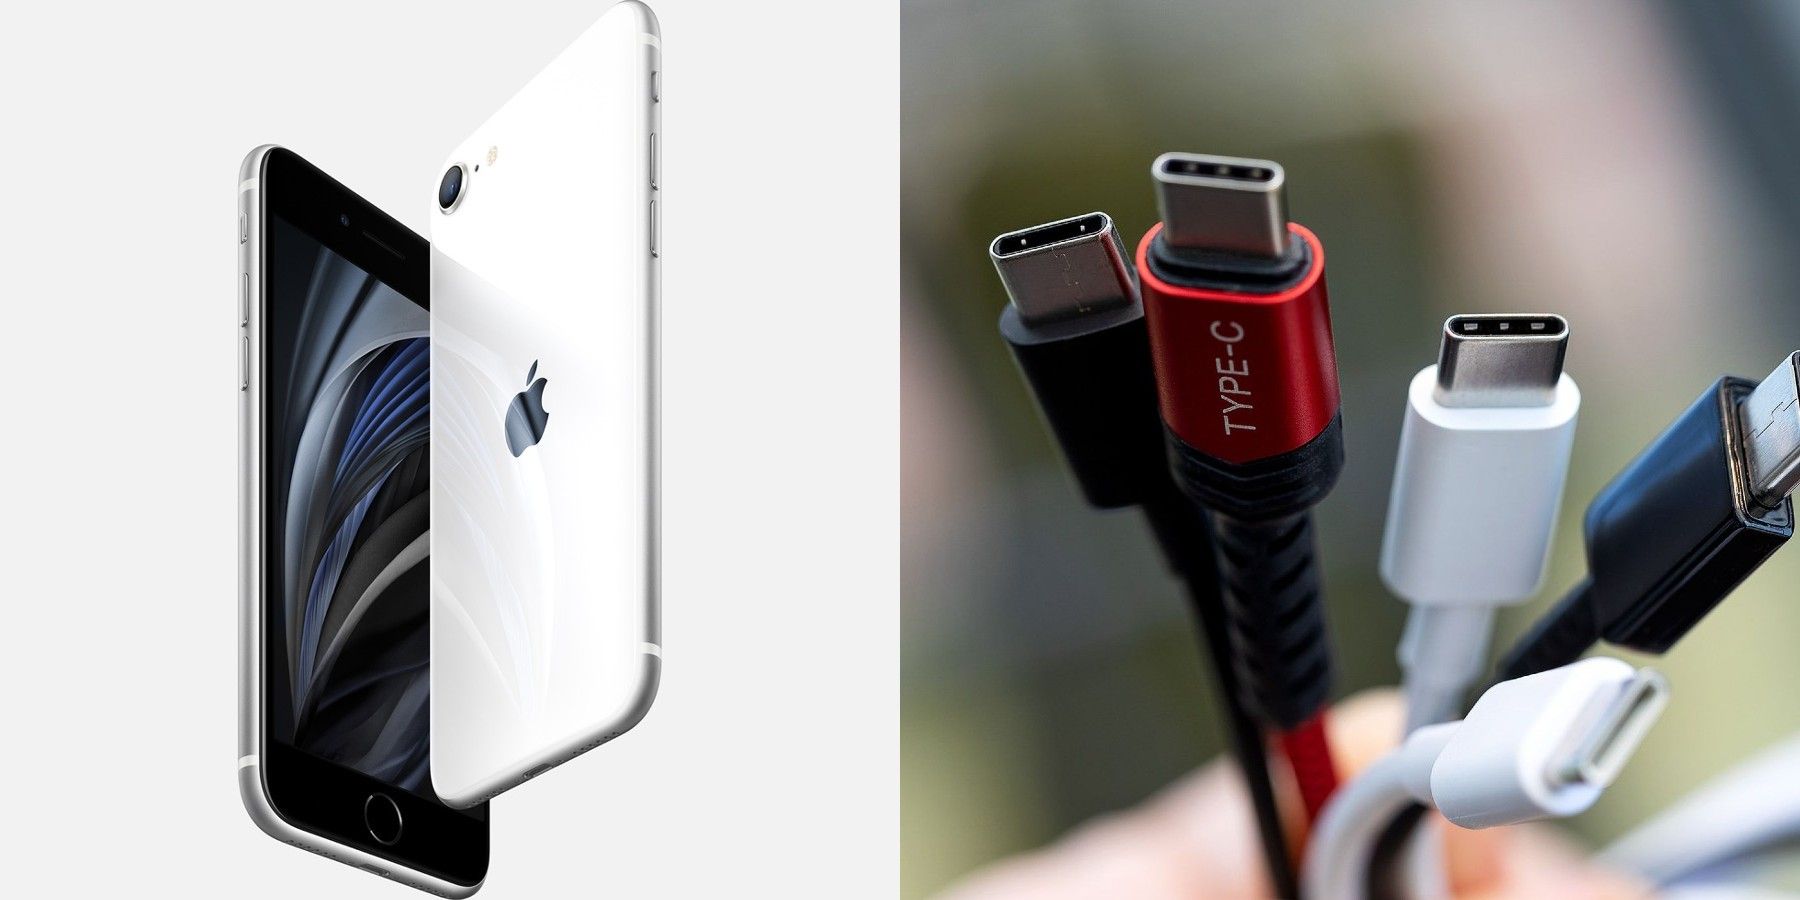 Engineer Makes iPhone With USB-C Port